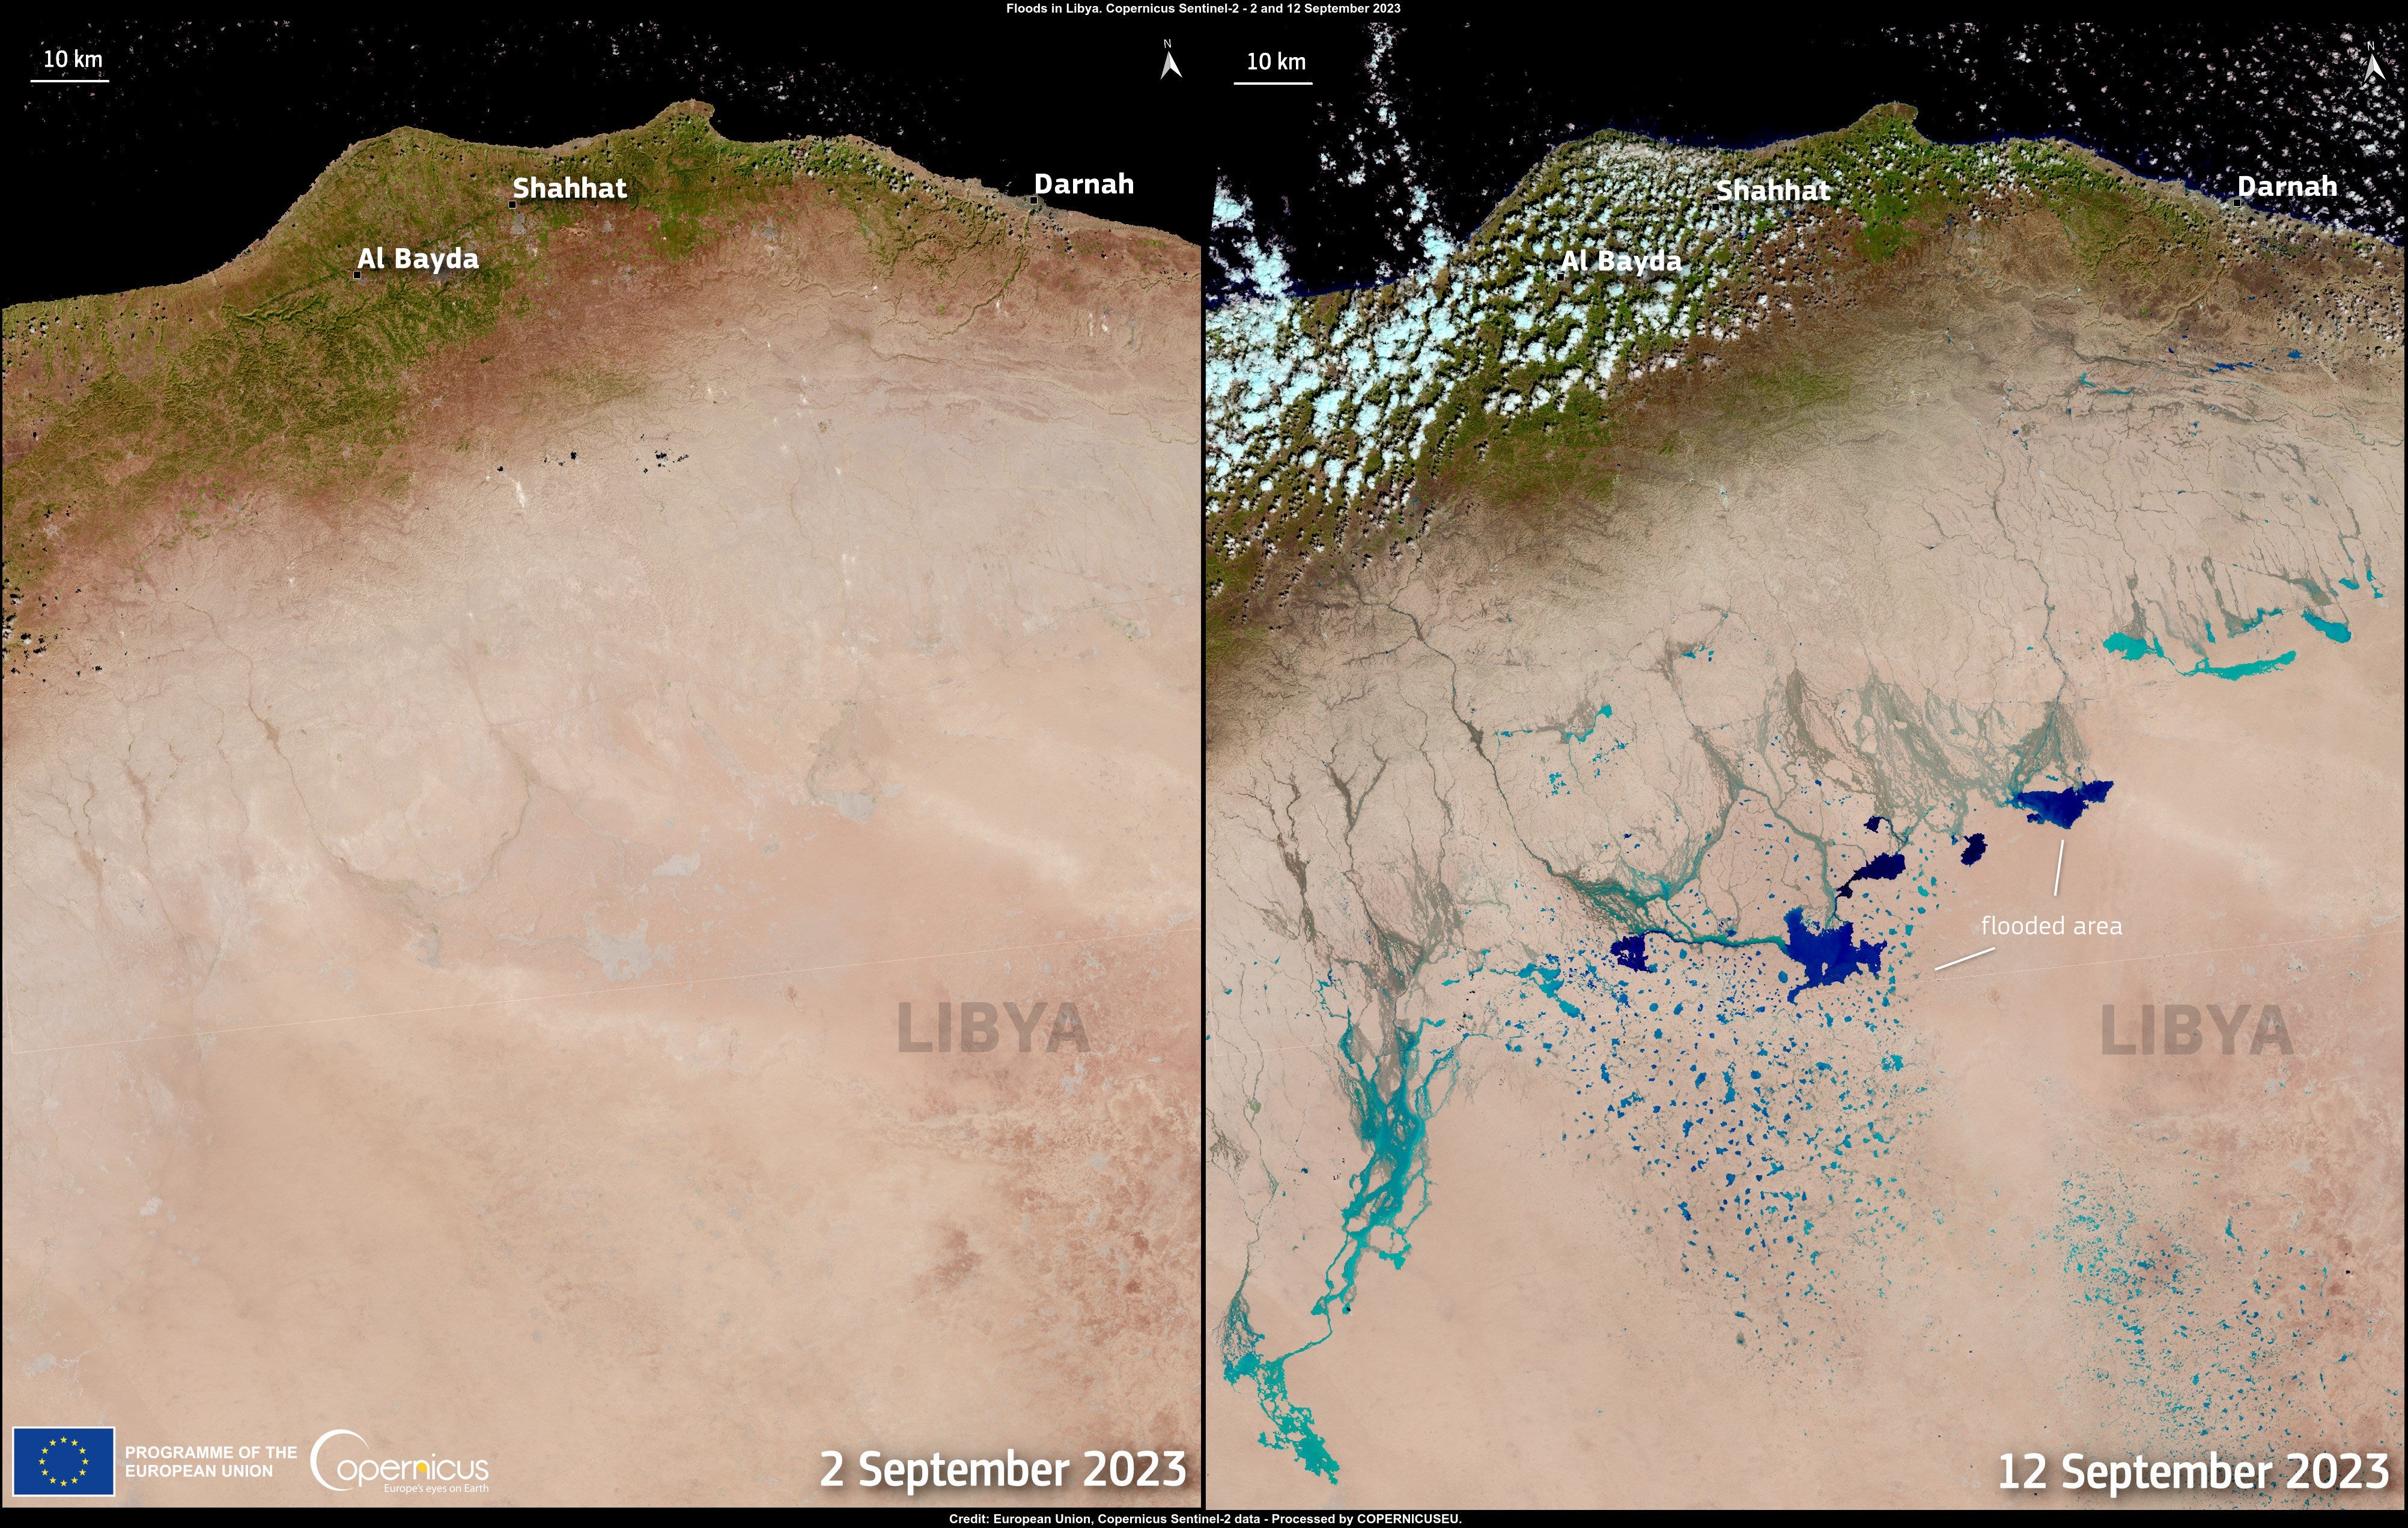 These two images, acquired by one of the Copernicus Sentinel-2 satellites on 2 and 12 September, show the Libyan desert before and after the aftermath of Storm Daniel